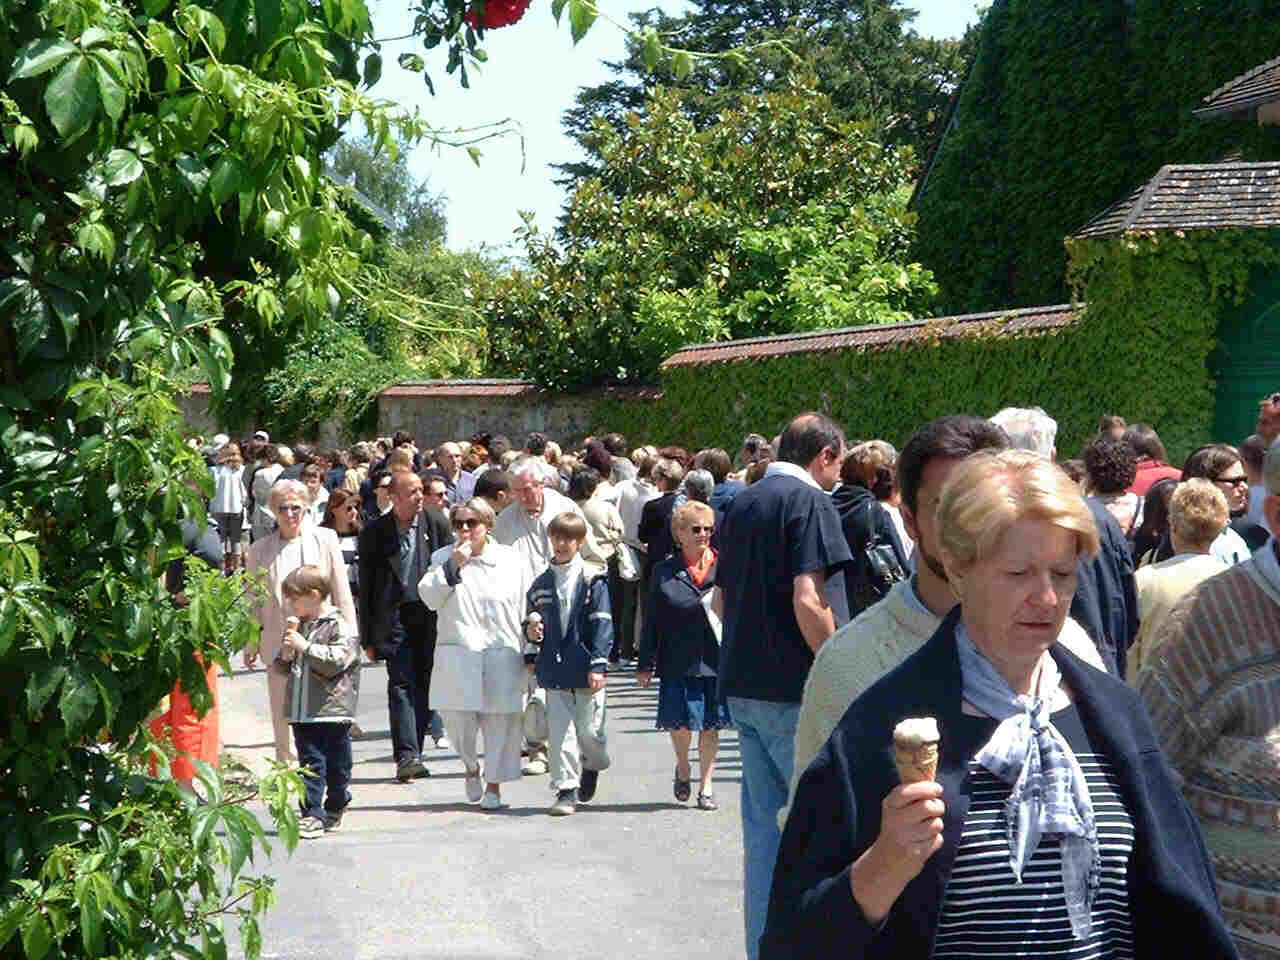 The line to see Monet's garden